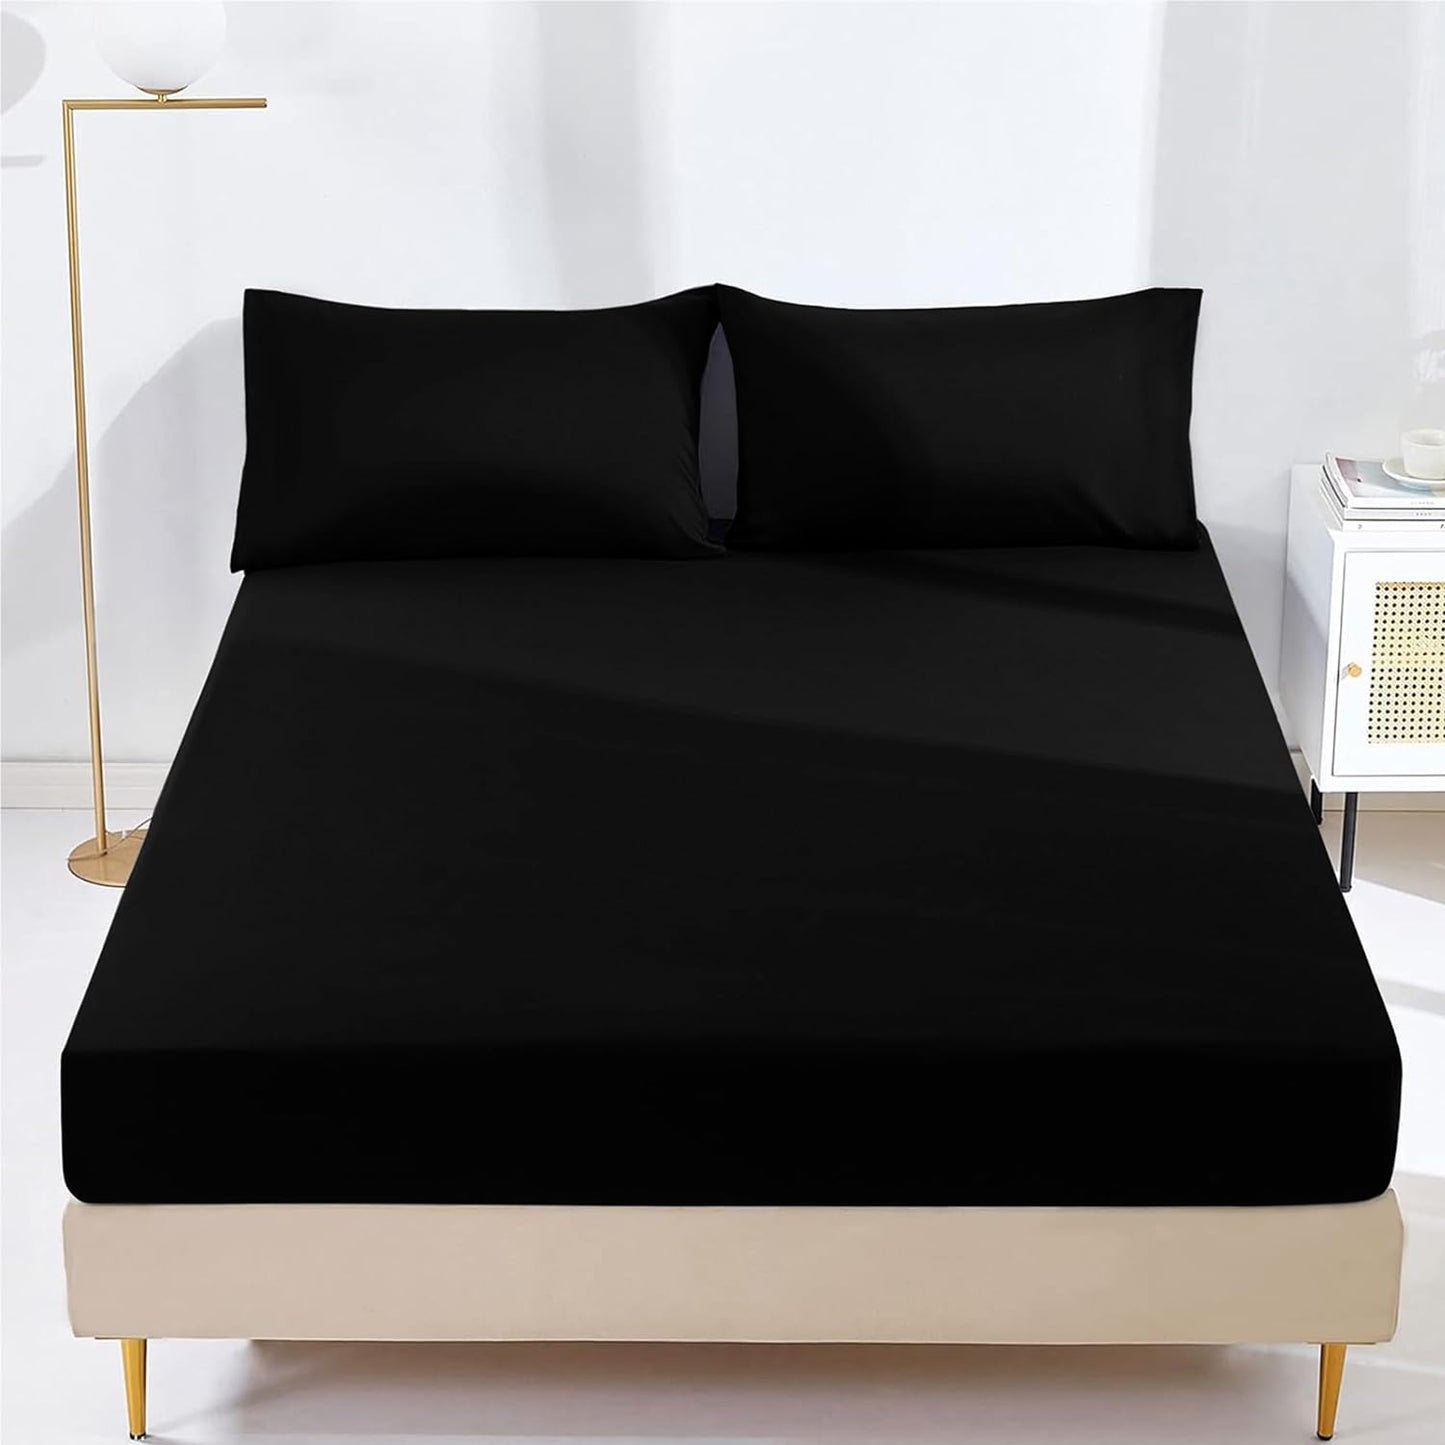 25cm Microfiber Fitted Sheet - Non Iron Wrinkle Soft Elastic Fitted Bed Sheets